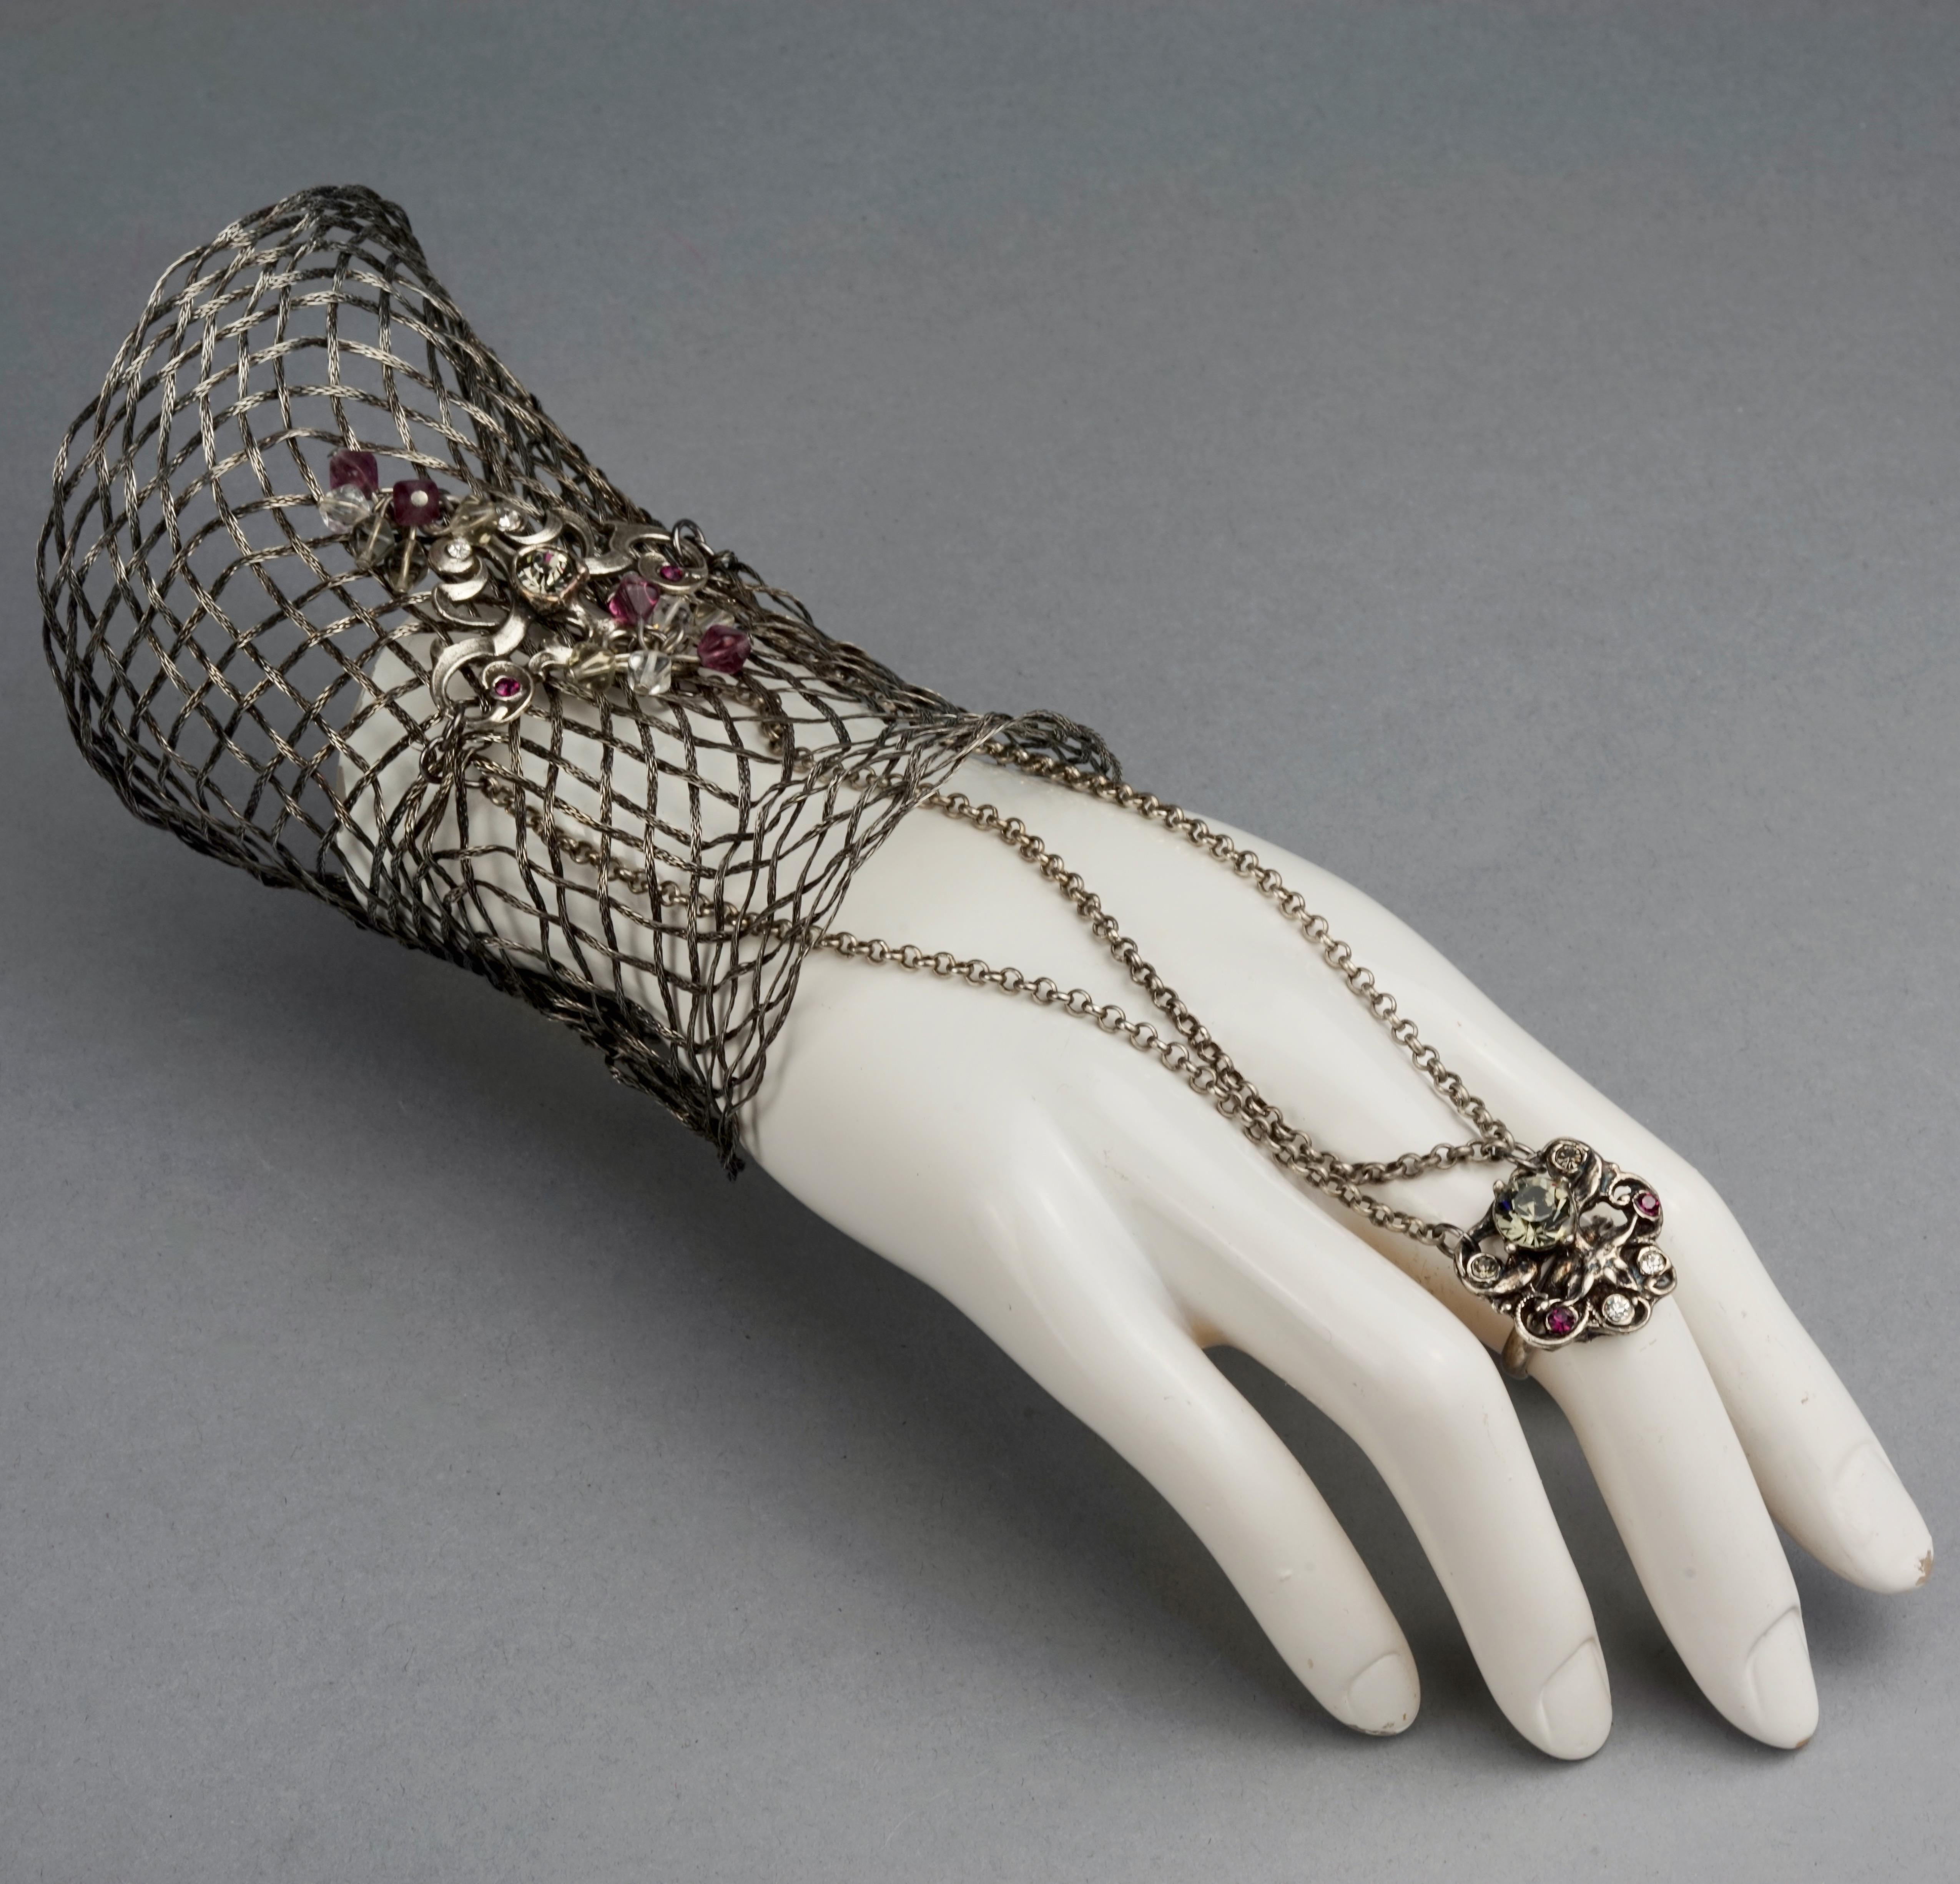 Vintage TON PASCAL Jewelled Baroque Ring and Mesh Cuff Bracelet In Excellent Condition For Sale In Kingersheim, Alsace